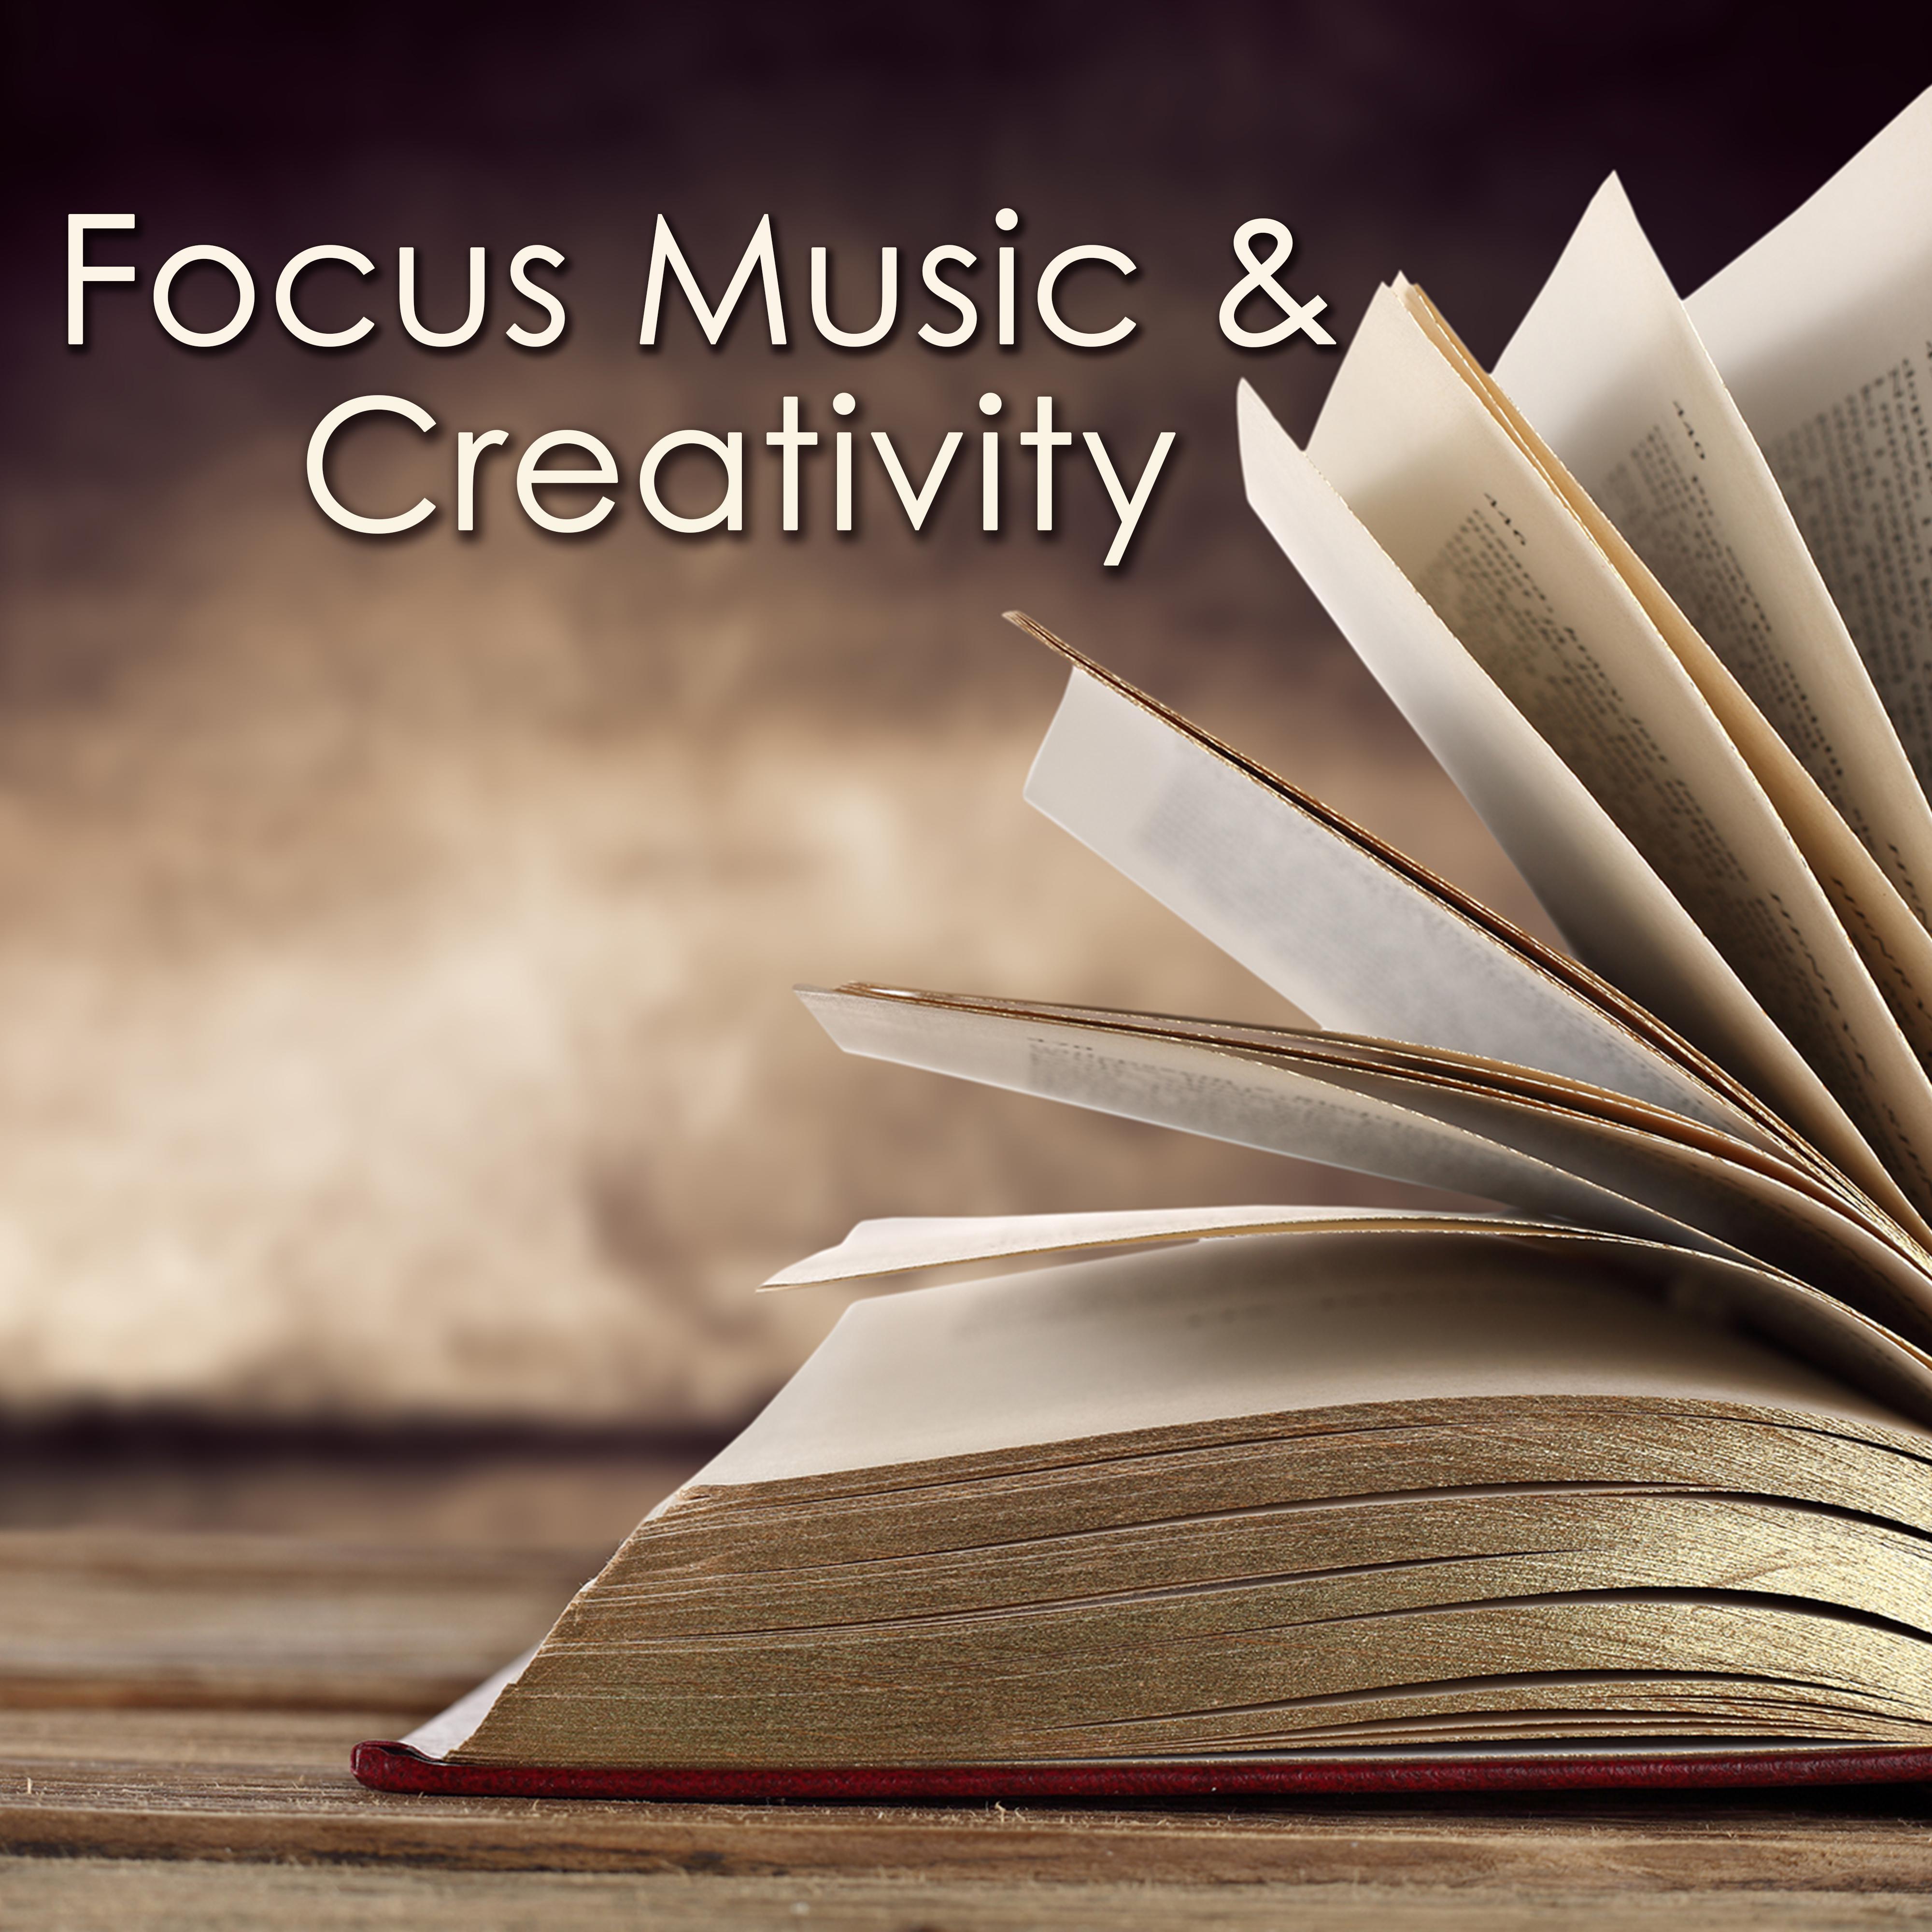 Focus Music  Creativity  Instrumental Songs for Studying, New Age Music to Improve Concentration, Fast Reading  Learning